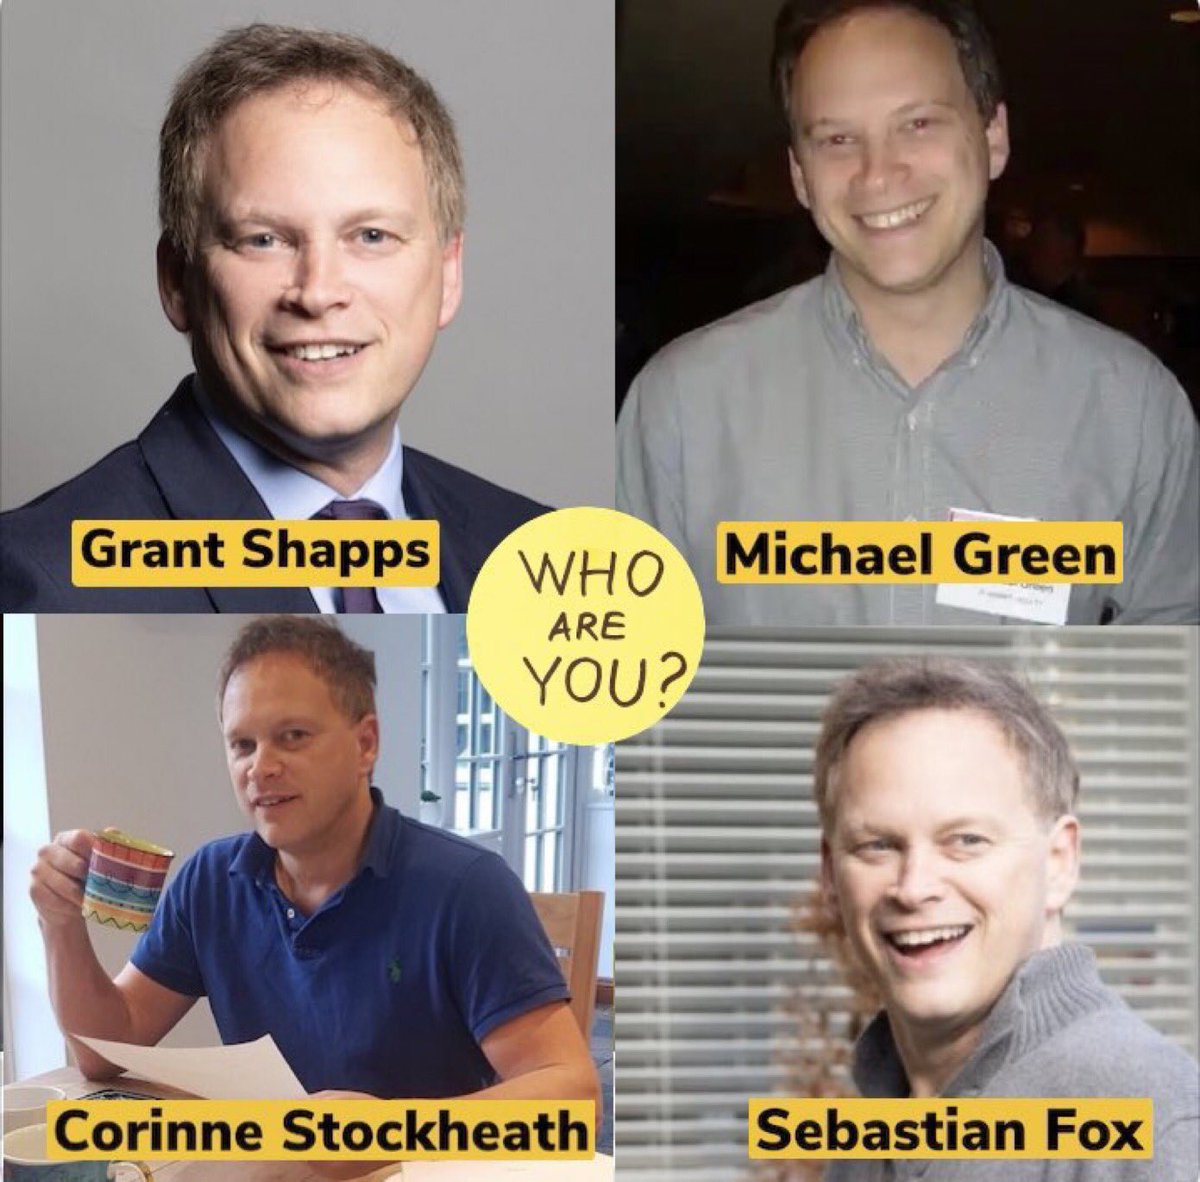 #GrantShapps is about to stand up and say that there has been an MOD computer hack and names may have been stolen...oh the irony!!! 😂😂😂 #MichaelGreen #CorinneStockheath #SebastianFox